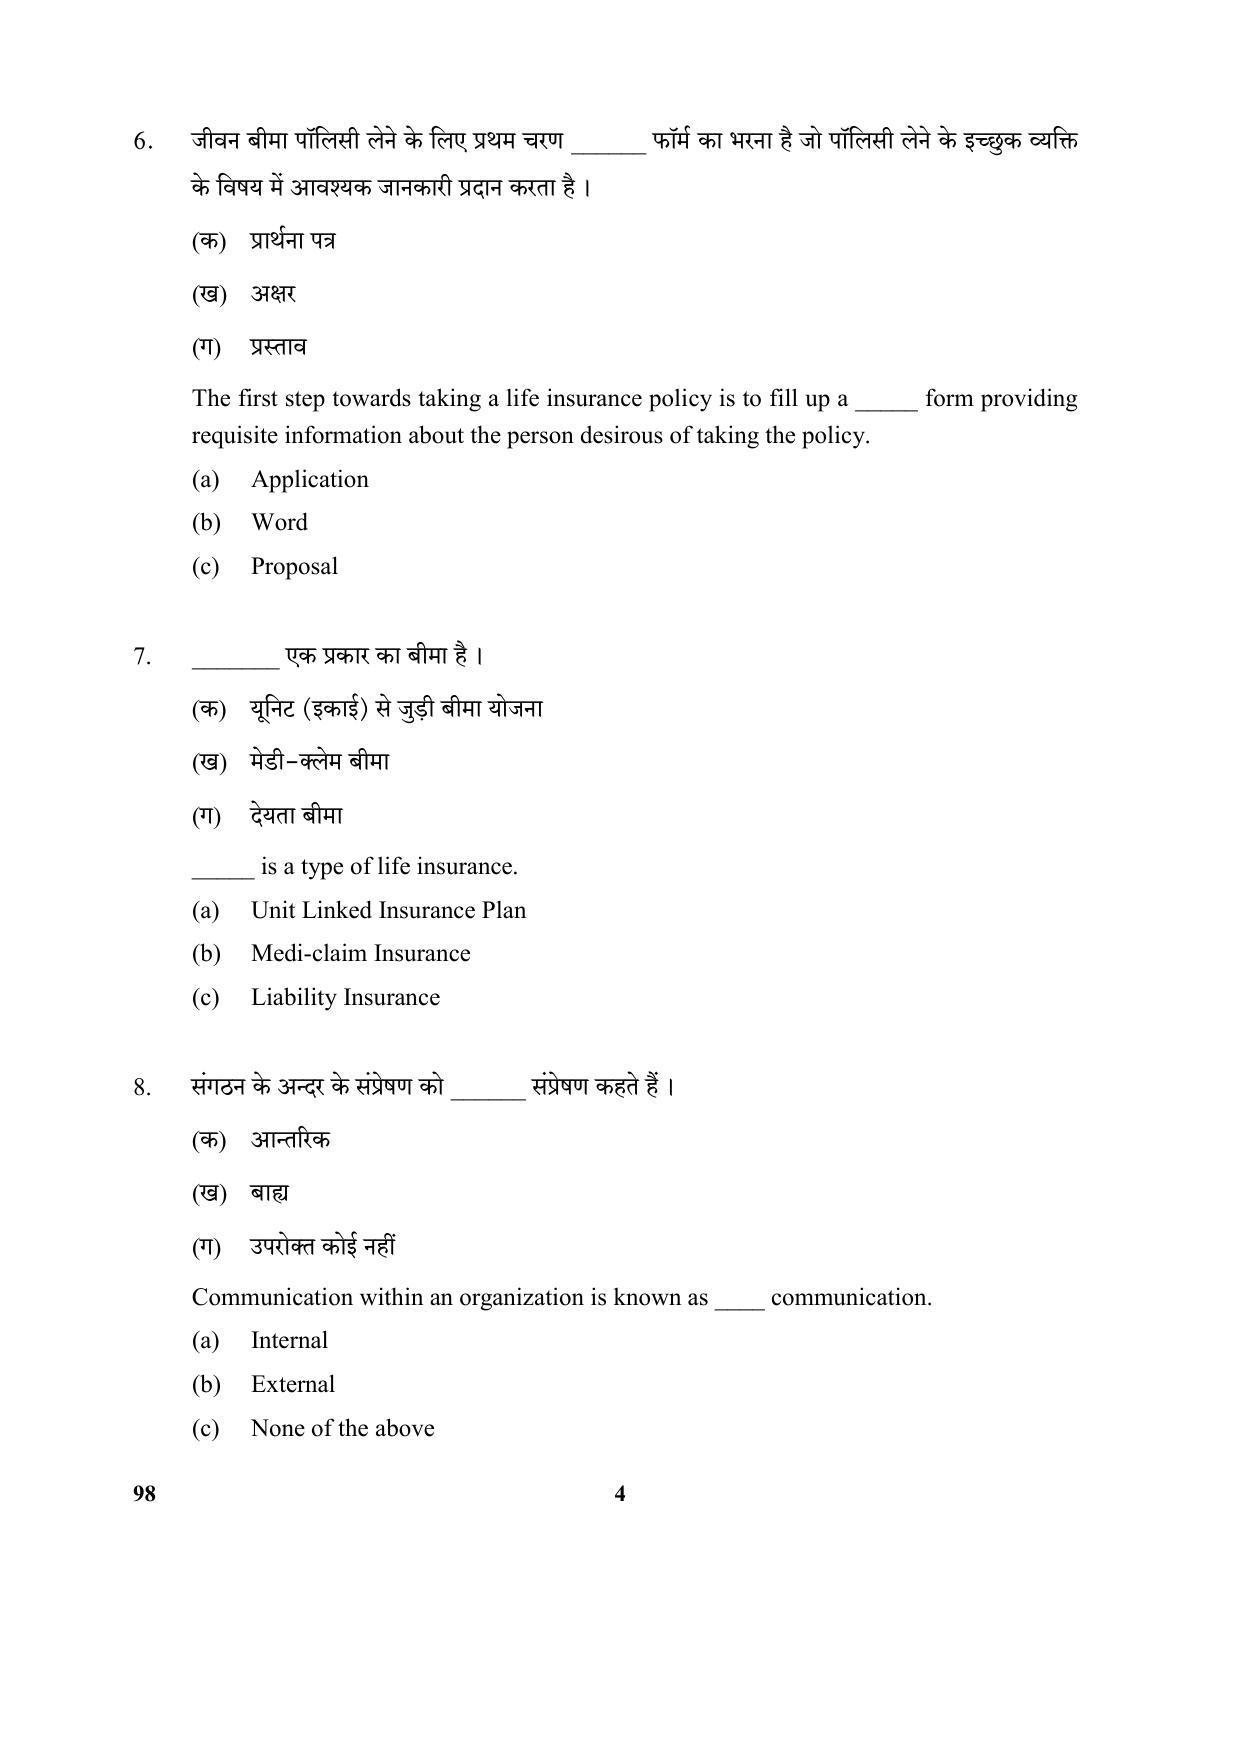 CBSE Class 10 98 (Banking & Insurance) 2018 Question Paper - Page 4